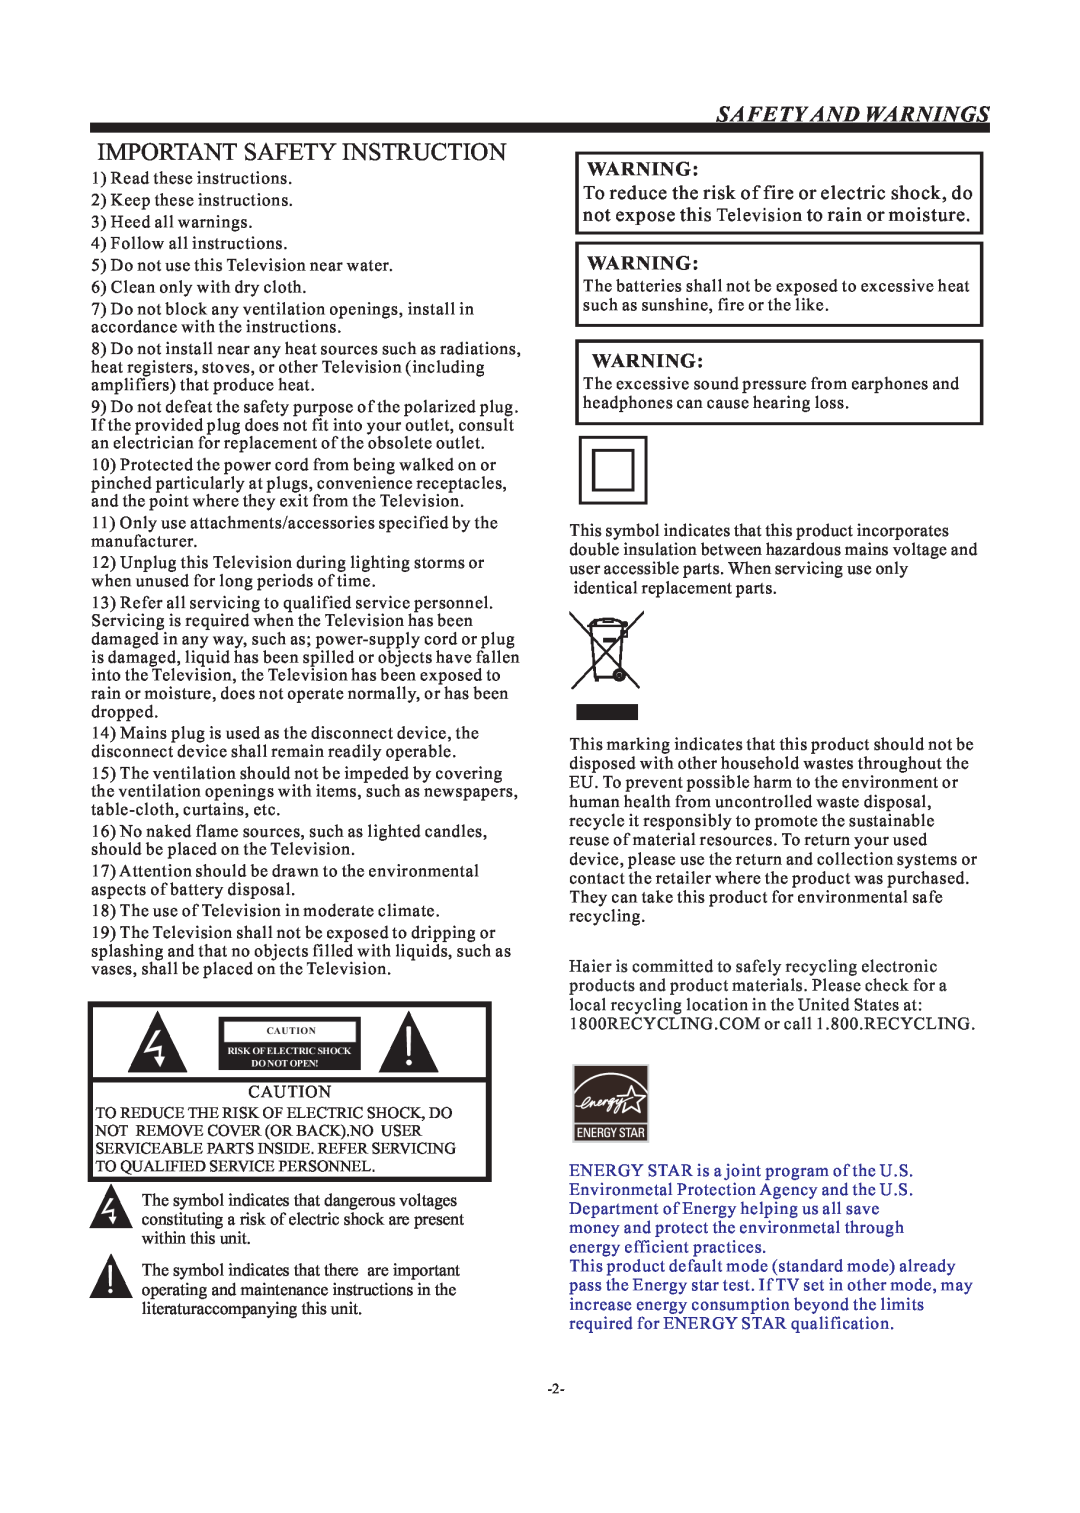 Haier LE24H3380 manual Important Safety Instruction, Safety And Warnings 